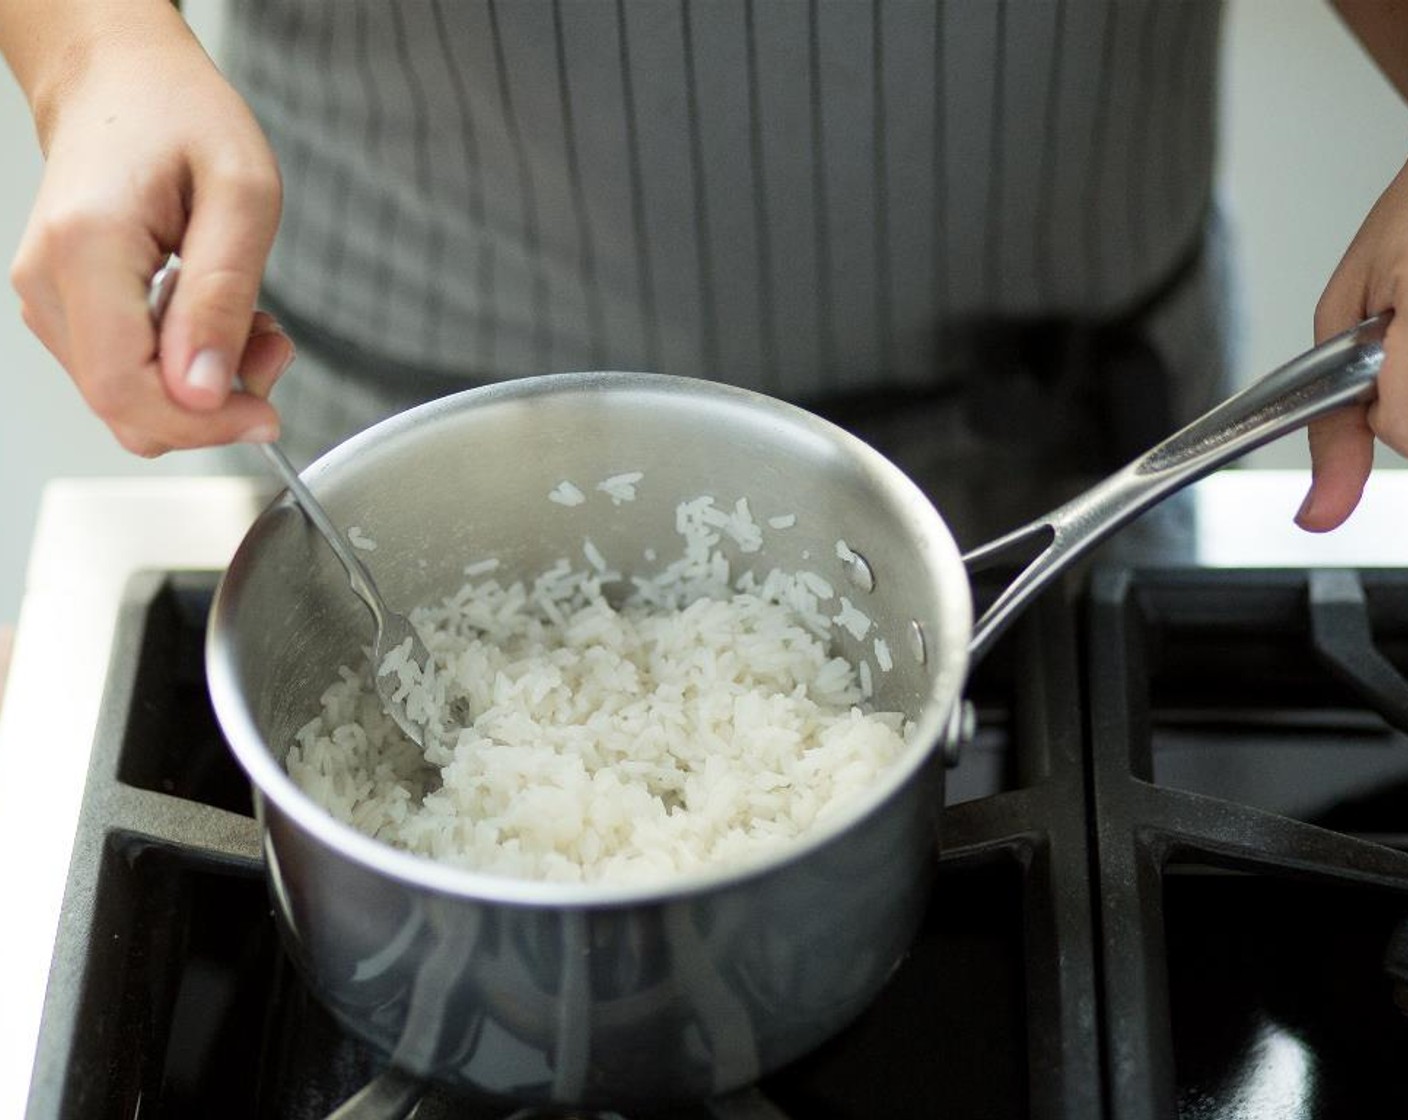 step 1 Bring the Jasmine Rice (2/3 cup) and Water (1 cup) to a boil in a small saucepot over medium-high heat. Stir, reduce heat to low, cover and simmer for 15 minutes. Fluff with a fork, cover again and keep warm for plating.